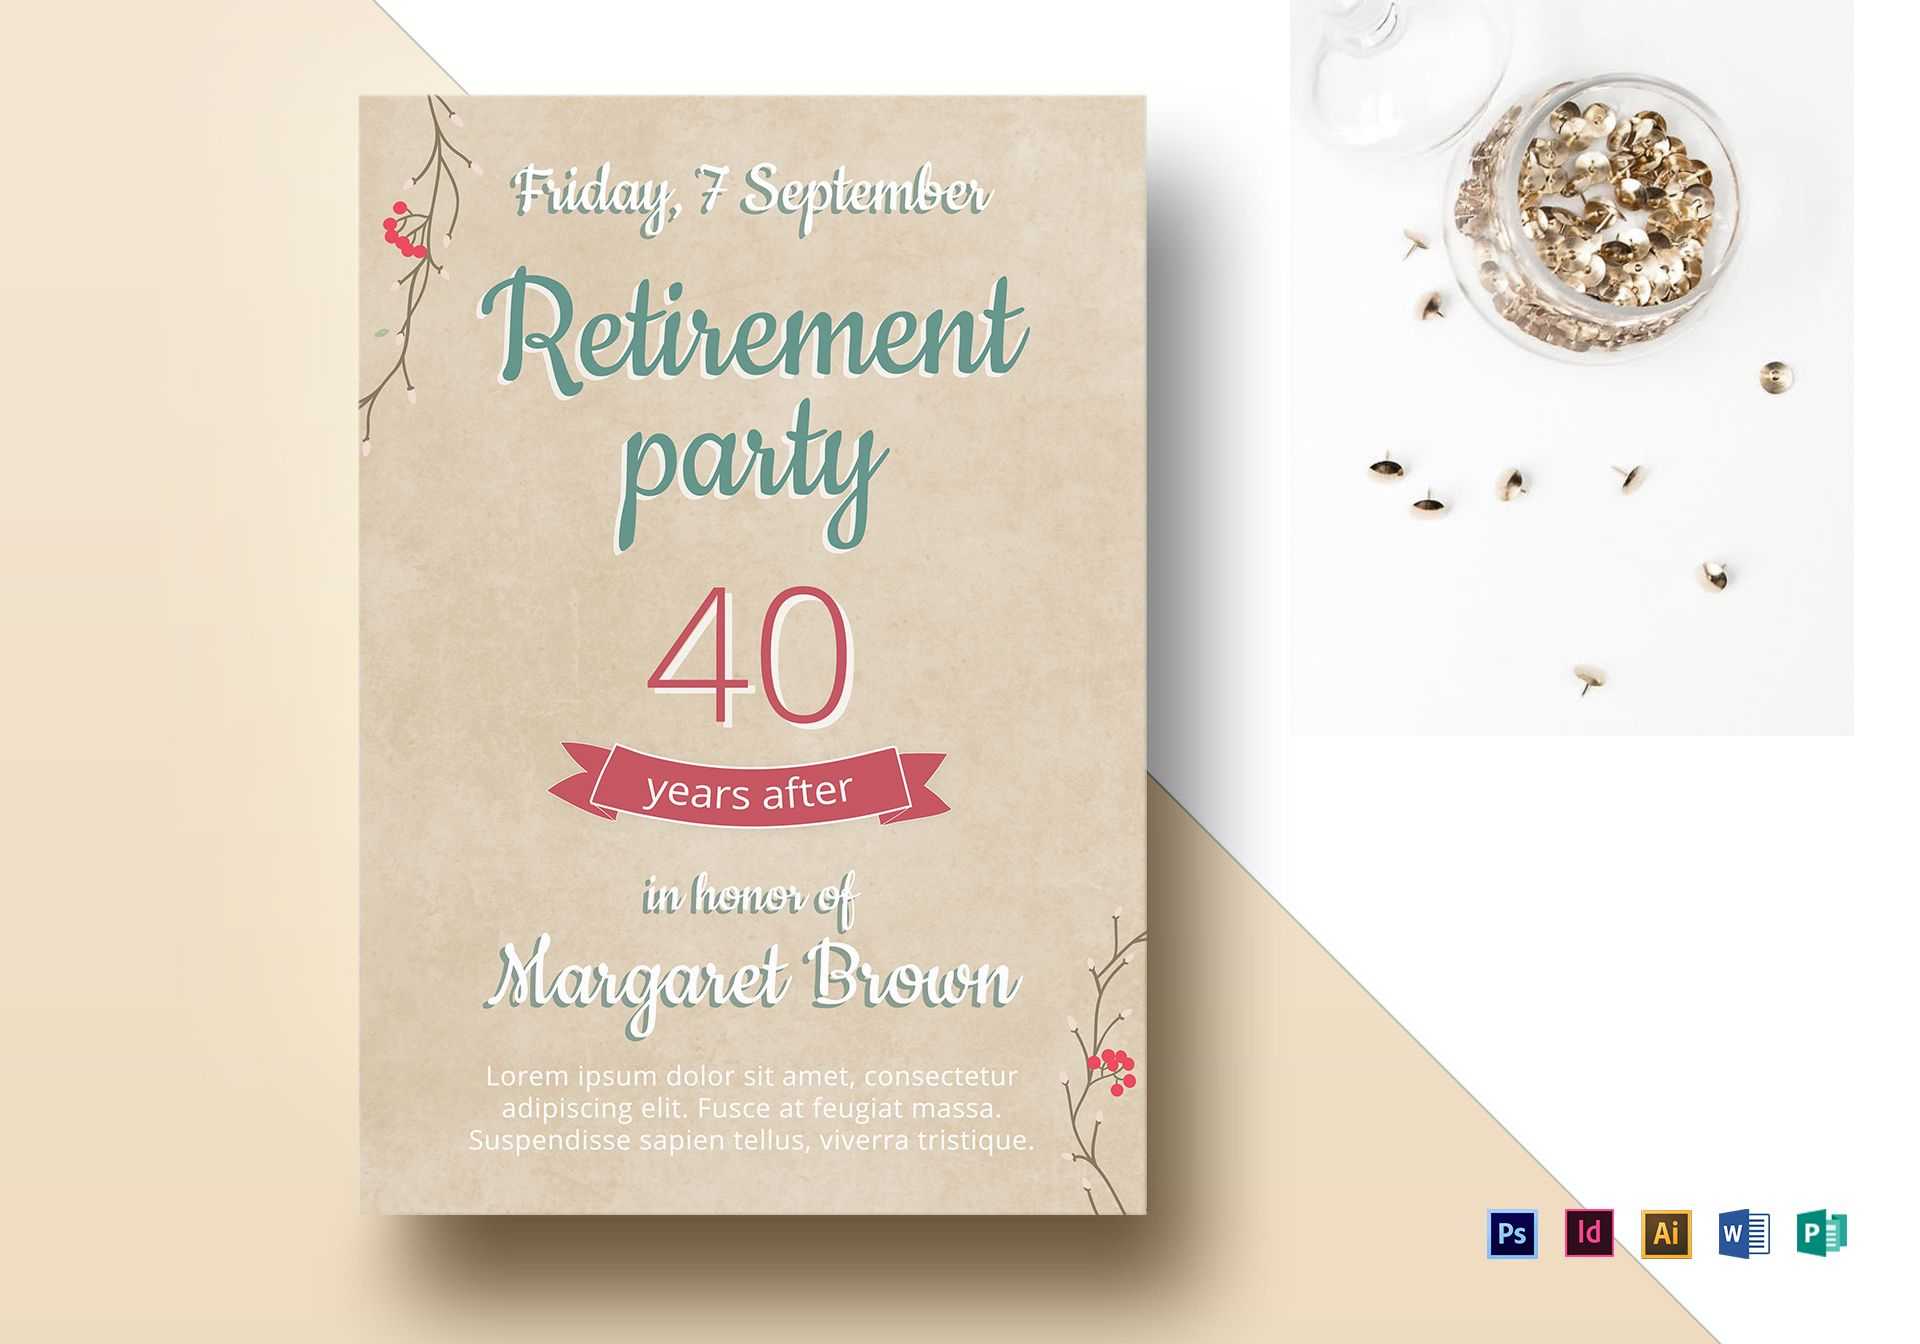 002 Retirement Party Flyer Templates Template Staggering Regarding Free Retirement Flyer Templates